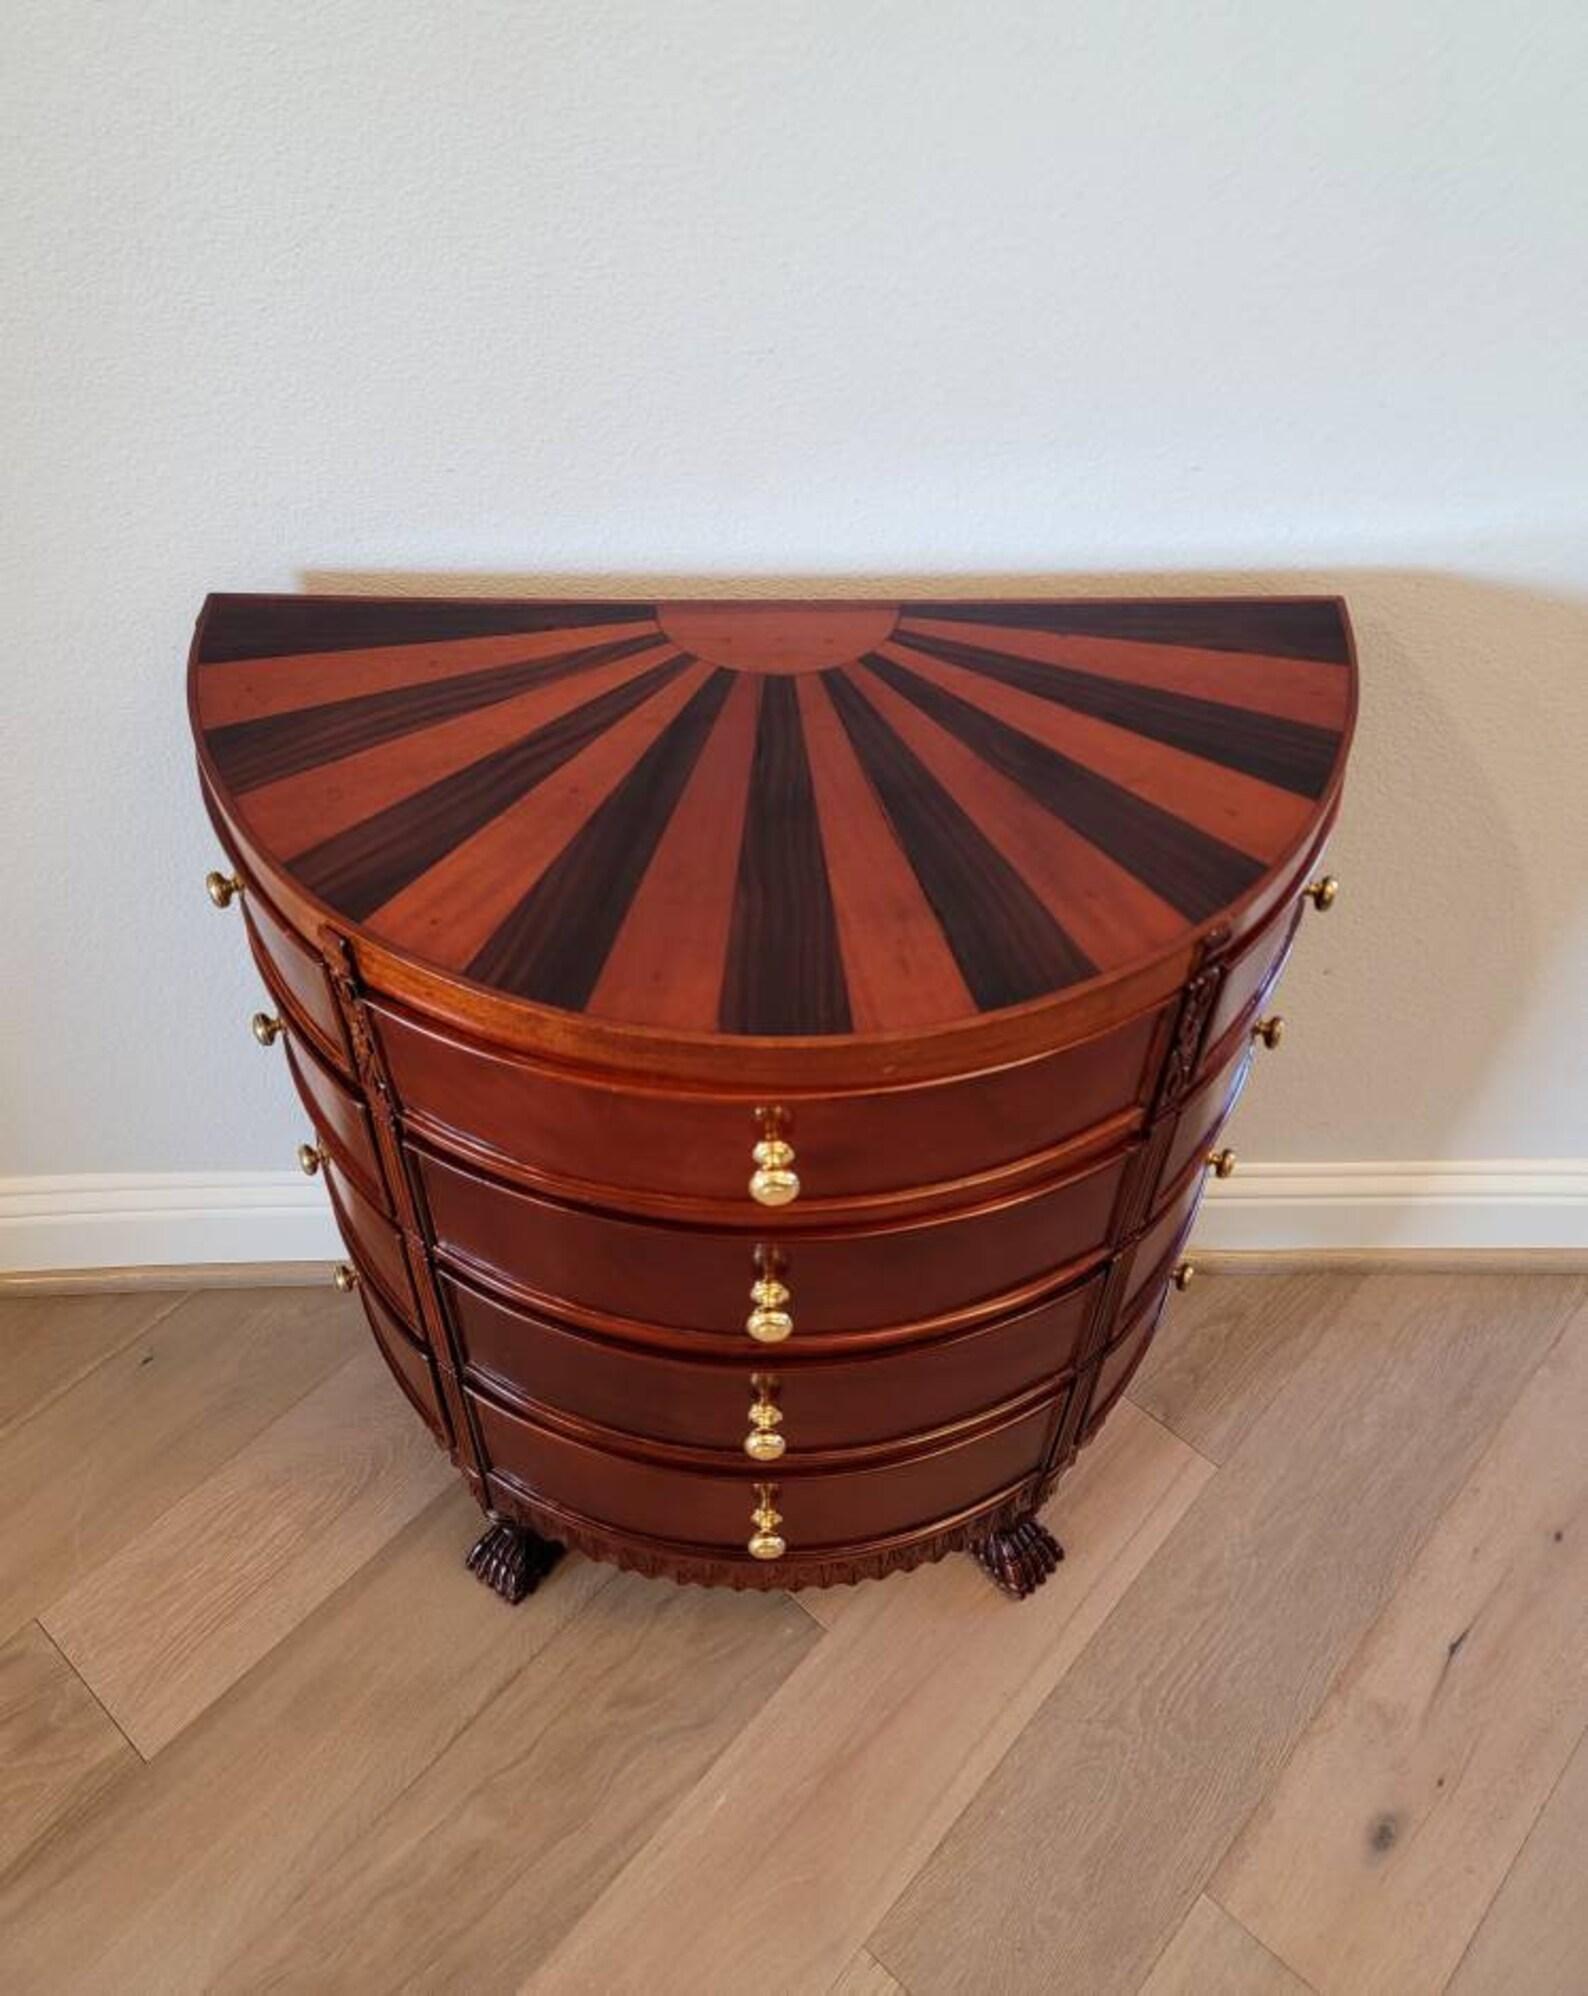 A vintage demilune chest of drawers haberdashery.

Featuring a semi-circular top with wonderfully distinctive radiating sun burst contrasting inlay design, over a very well made conforming bow front case fitted with a most impressive twelve